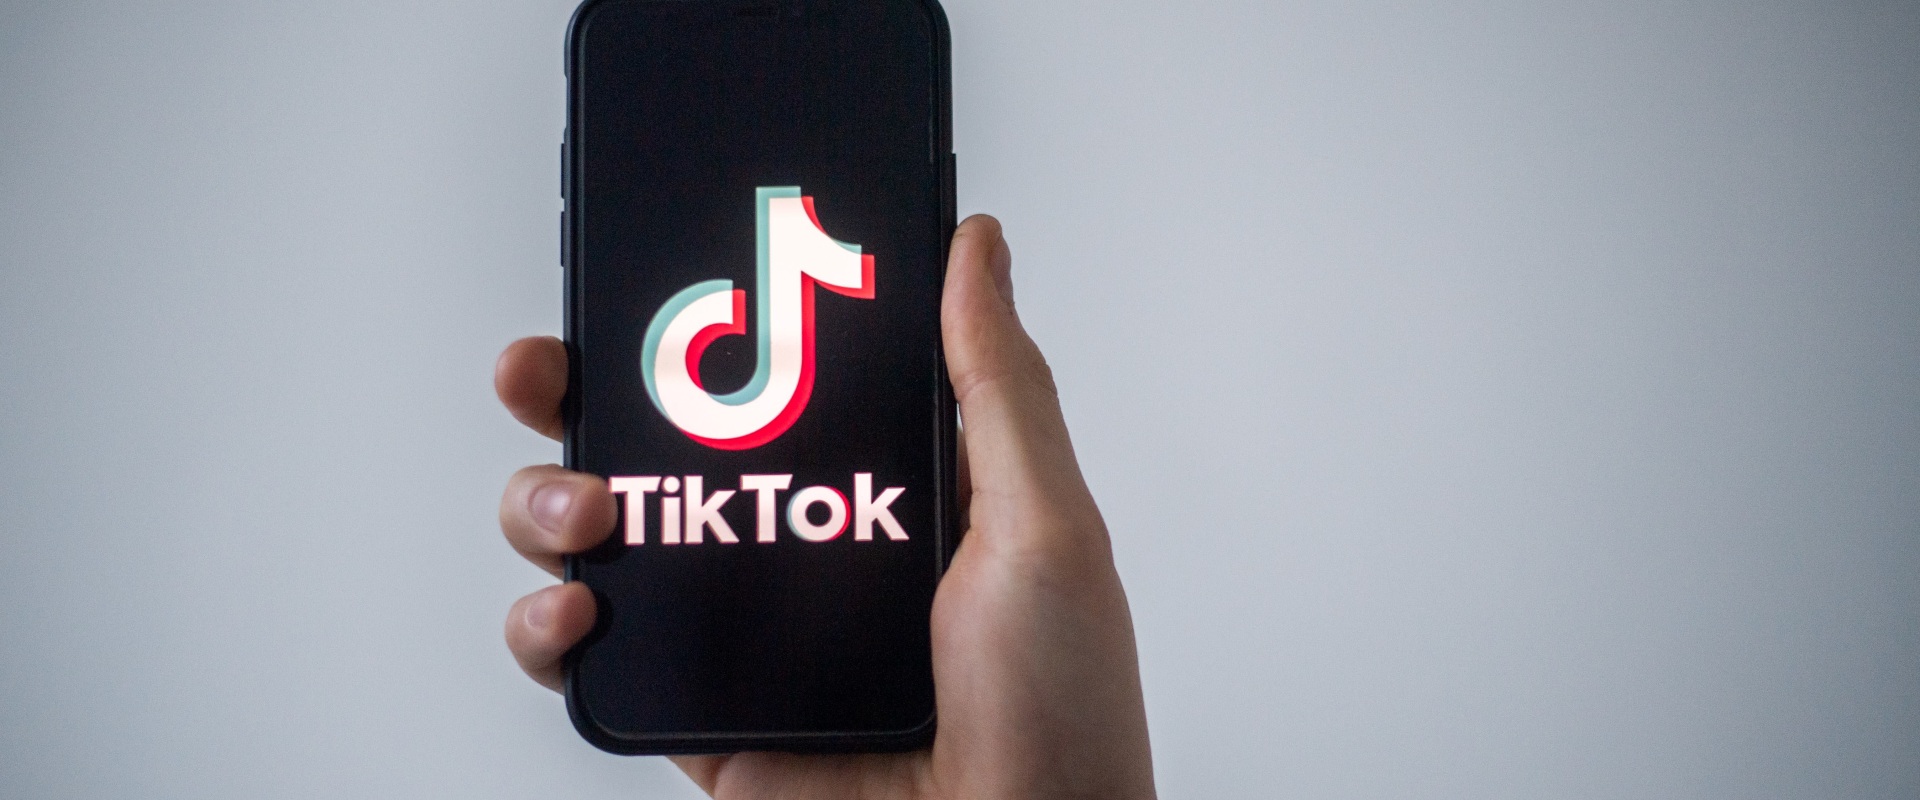 Compatible Video Sharing Services for TikTok Webcams